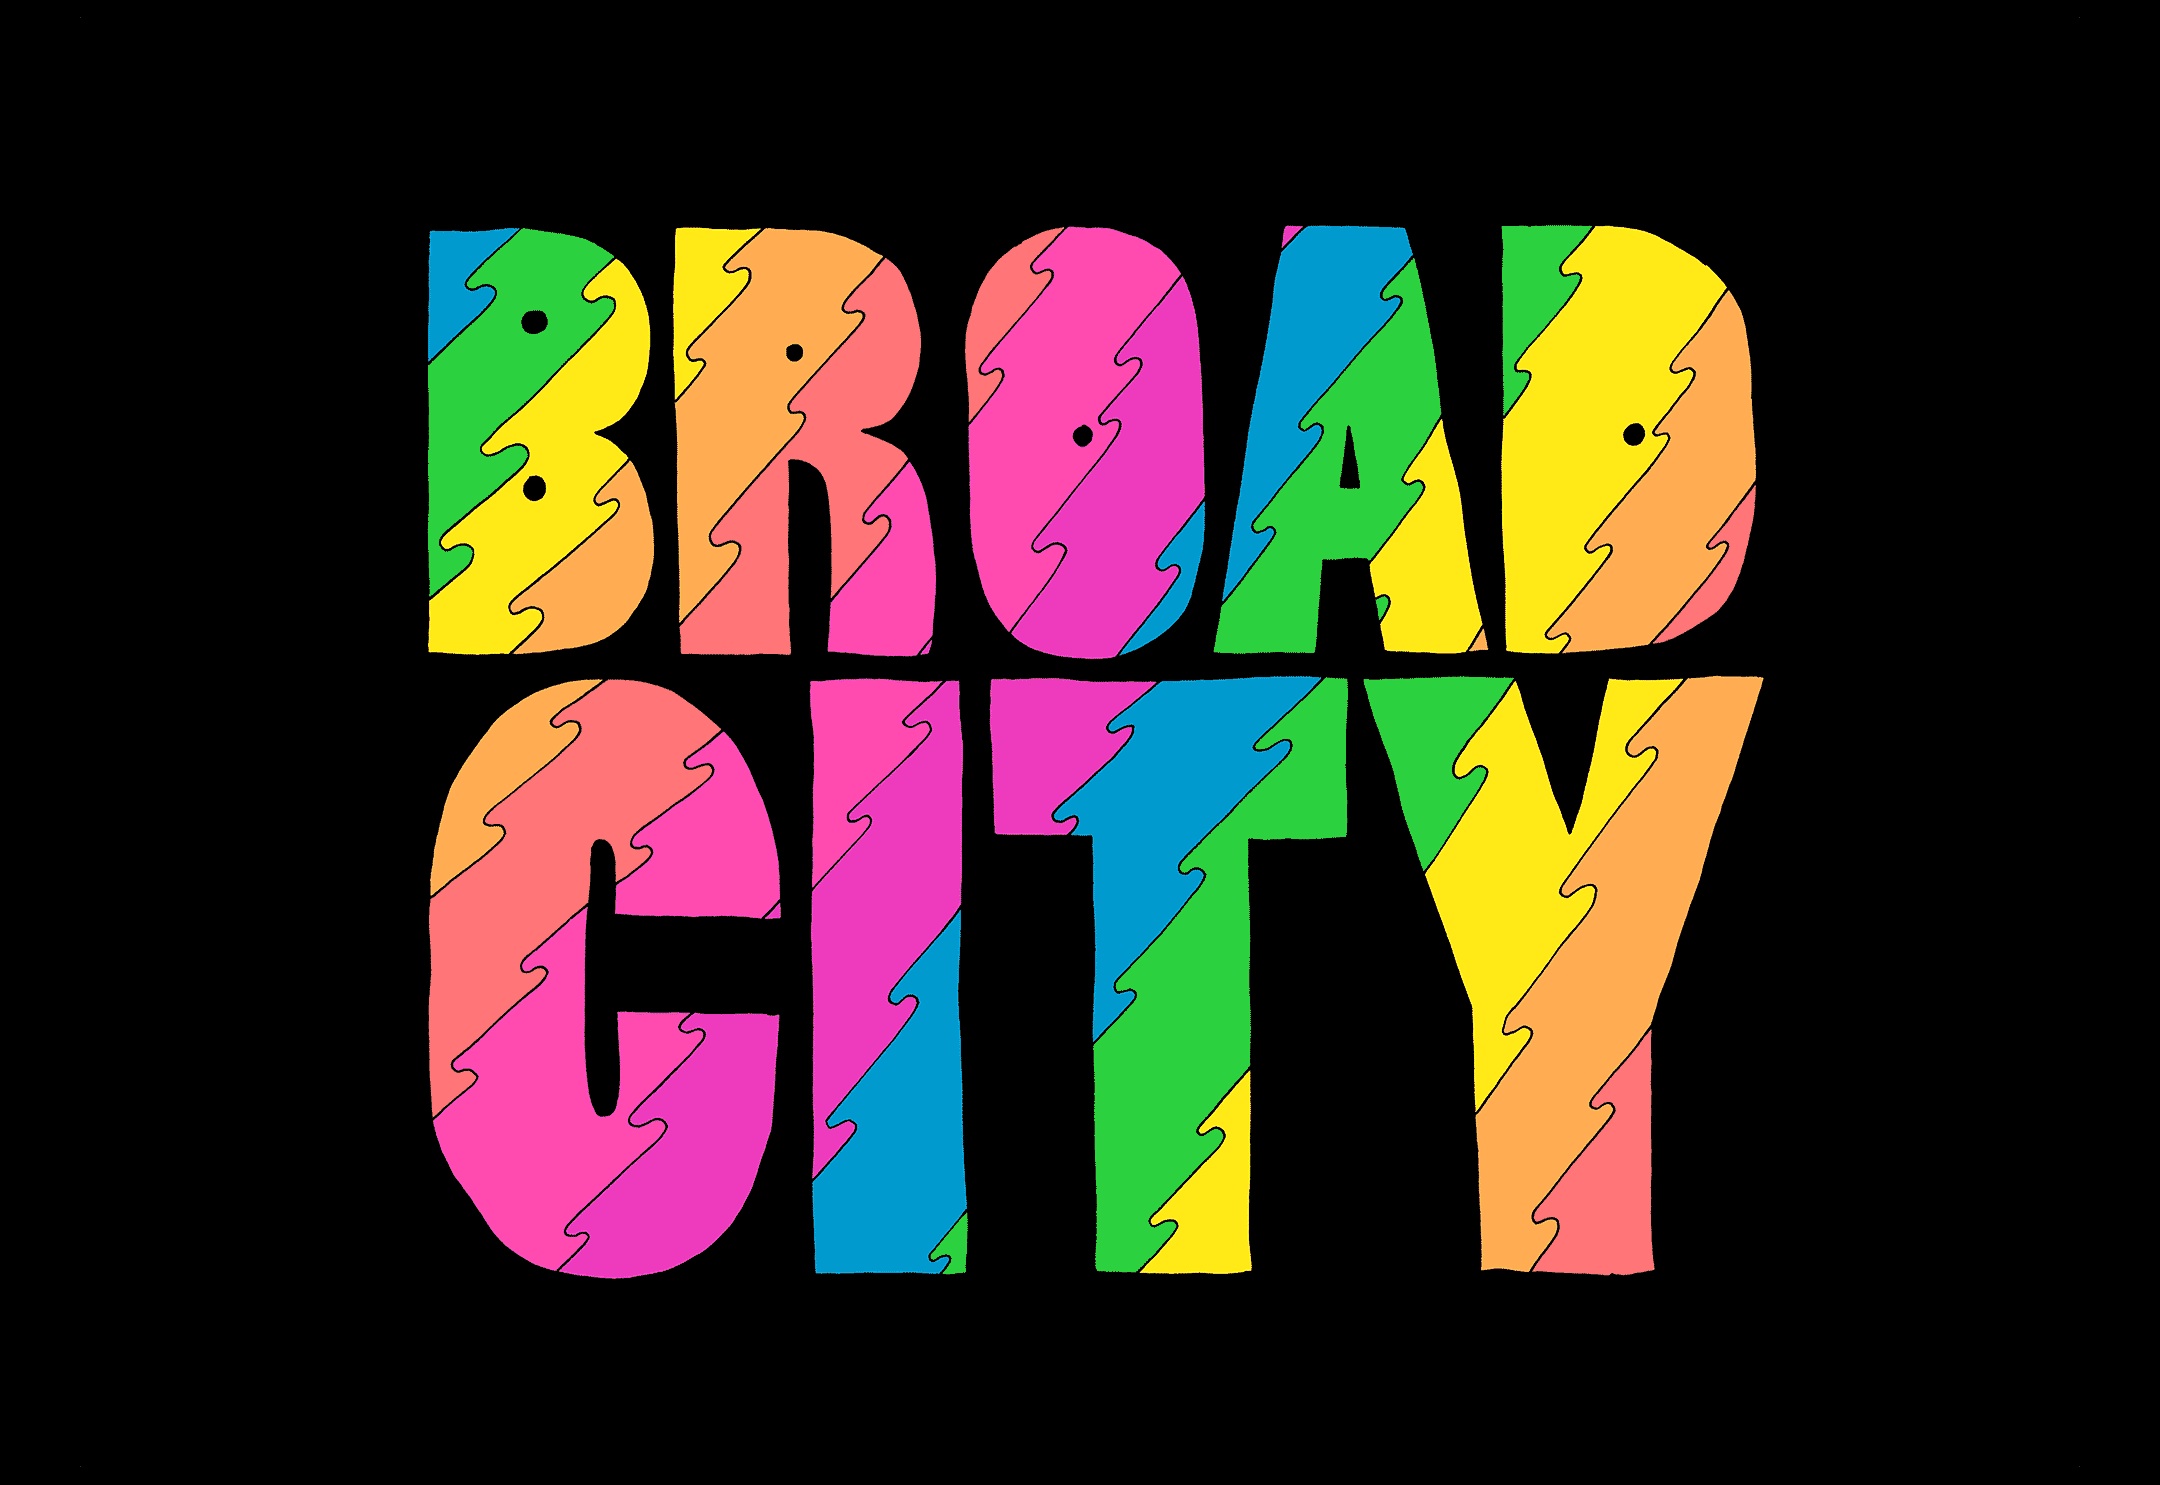 Meet the Artist Behind Broad City's Awesome Animated Intros - Creators